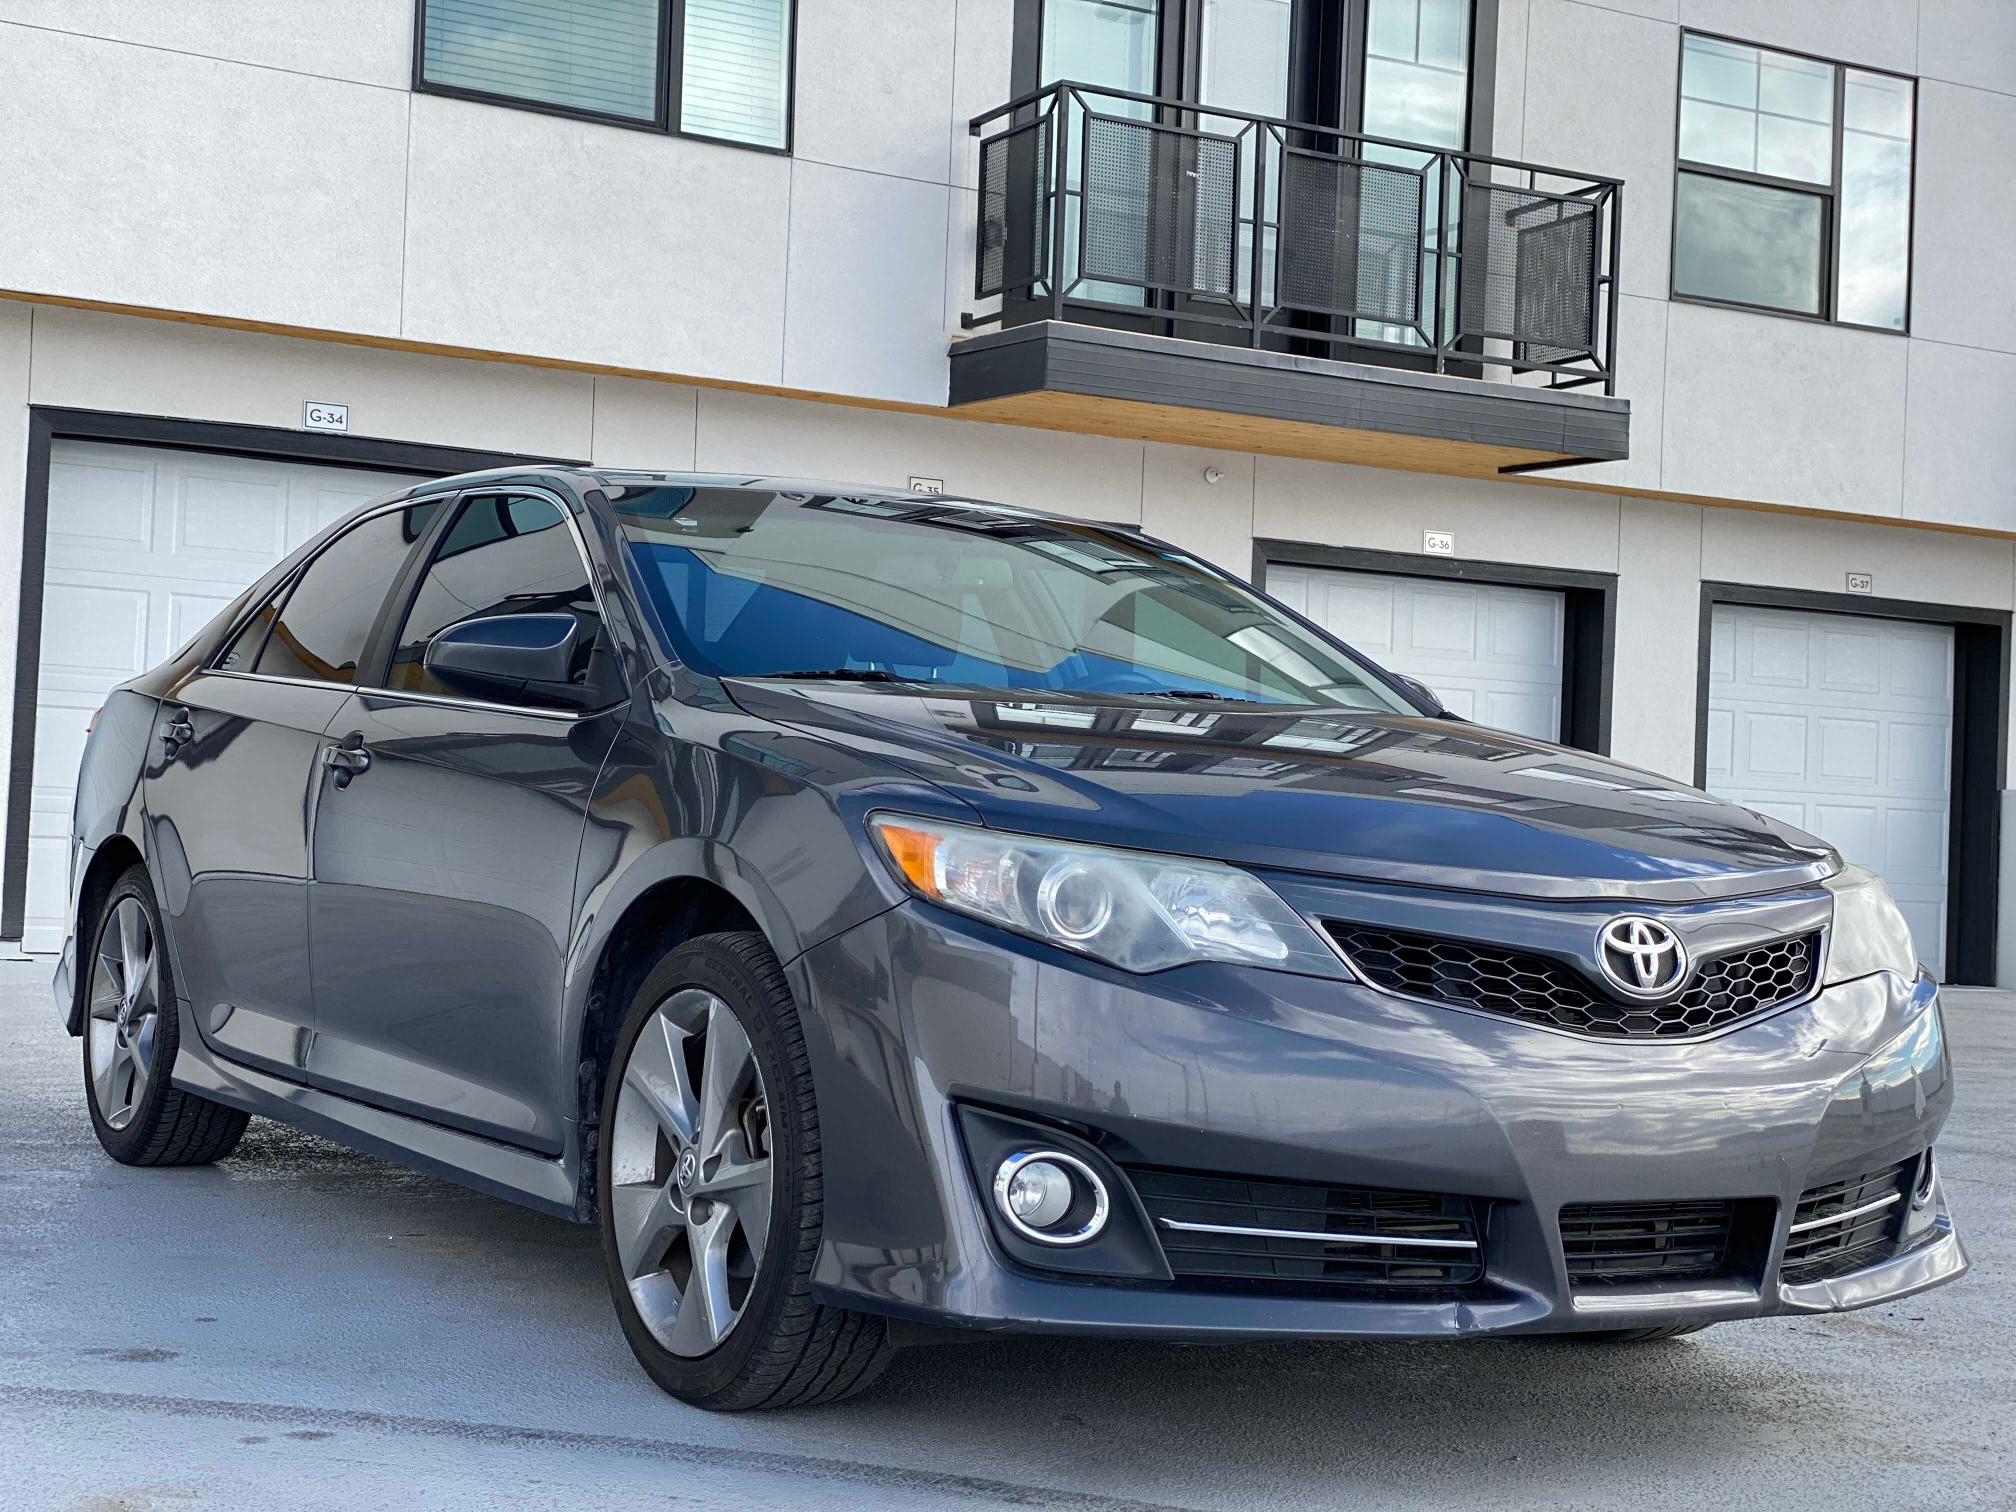 2014 TOYOTA CAMRY SE for Sale | UT - SALT LAKE CITY | Thu. Mar 25, 2021 -  Used & Repairable Salvage Cars - Copart USA